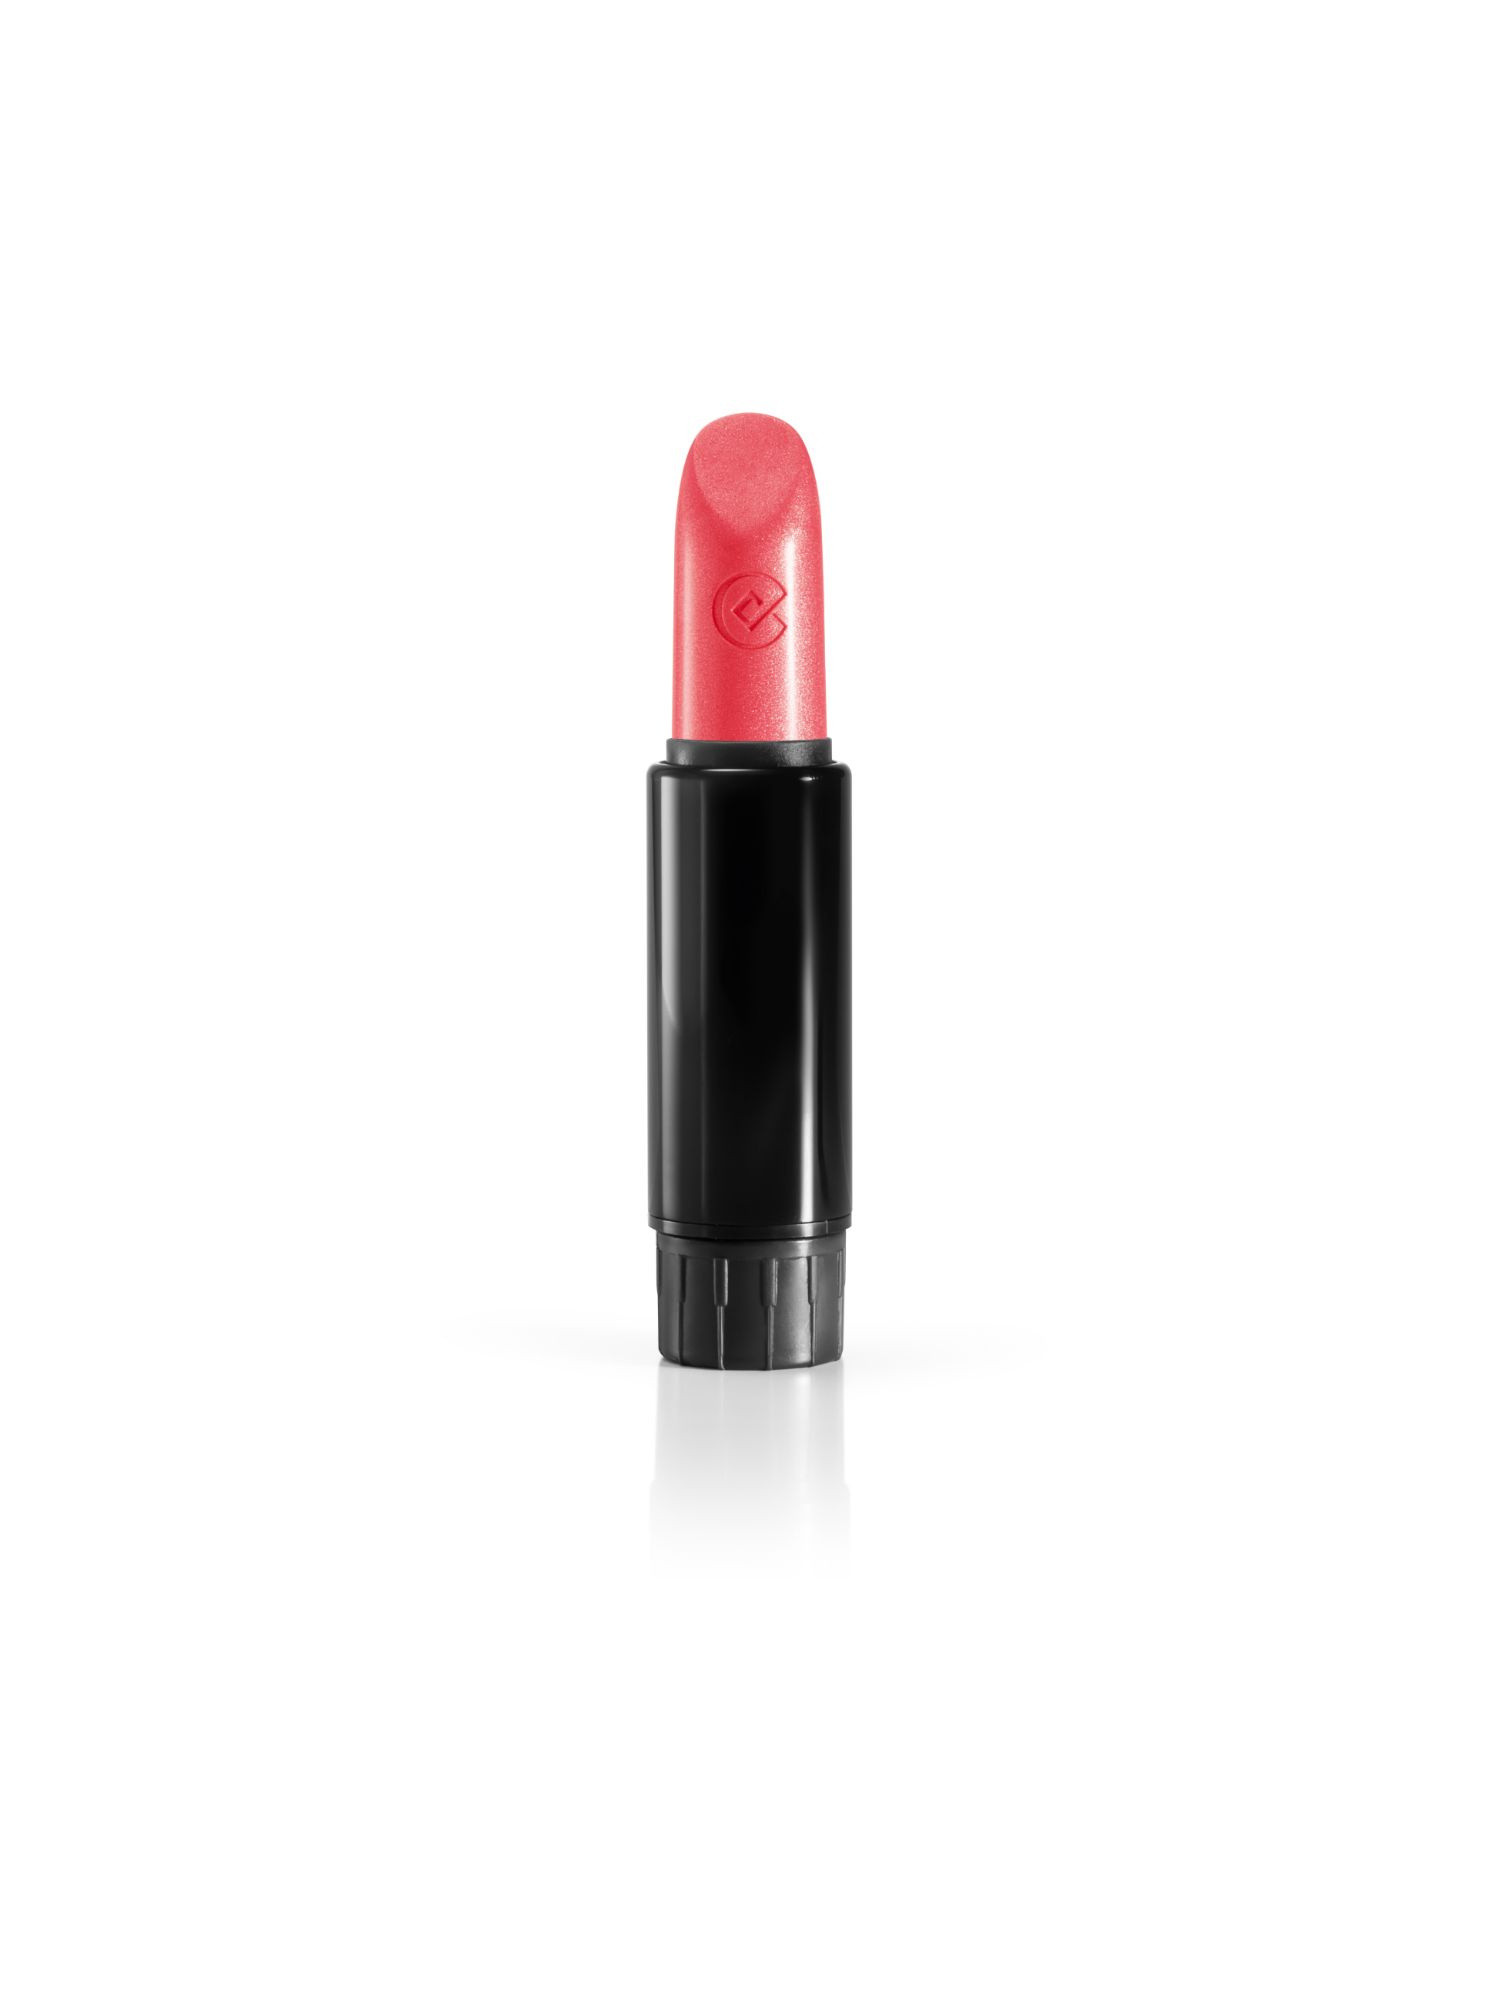 Pure lipstick refill - 28 Rosa Pesca, Pink Flamingo, large image number 0